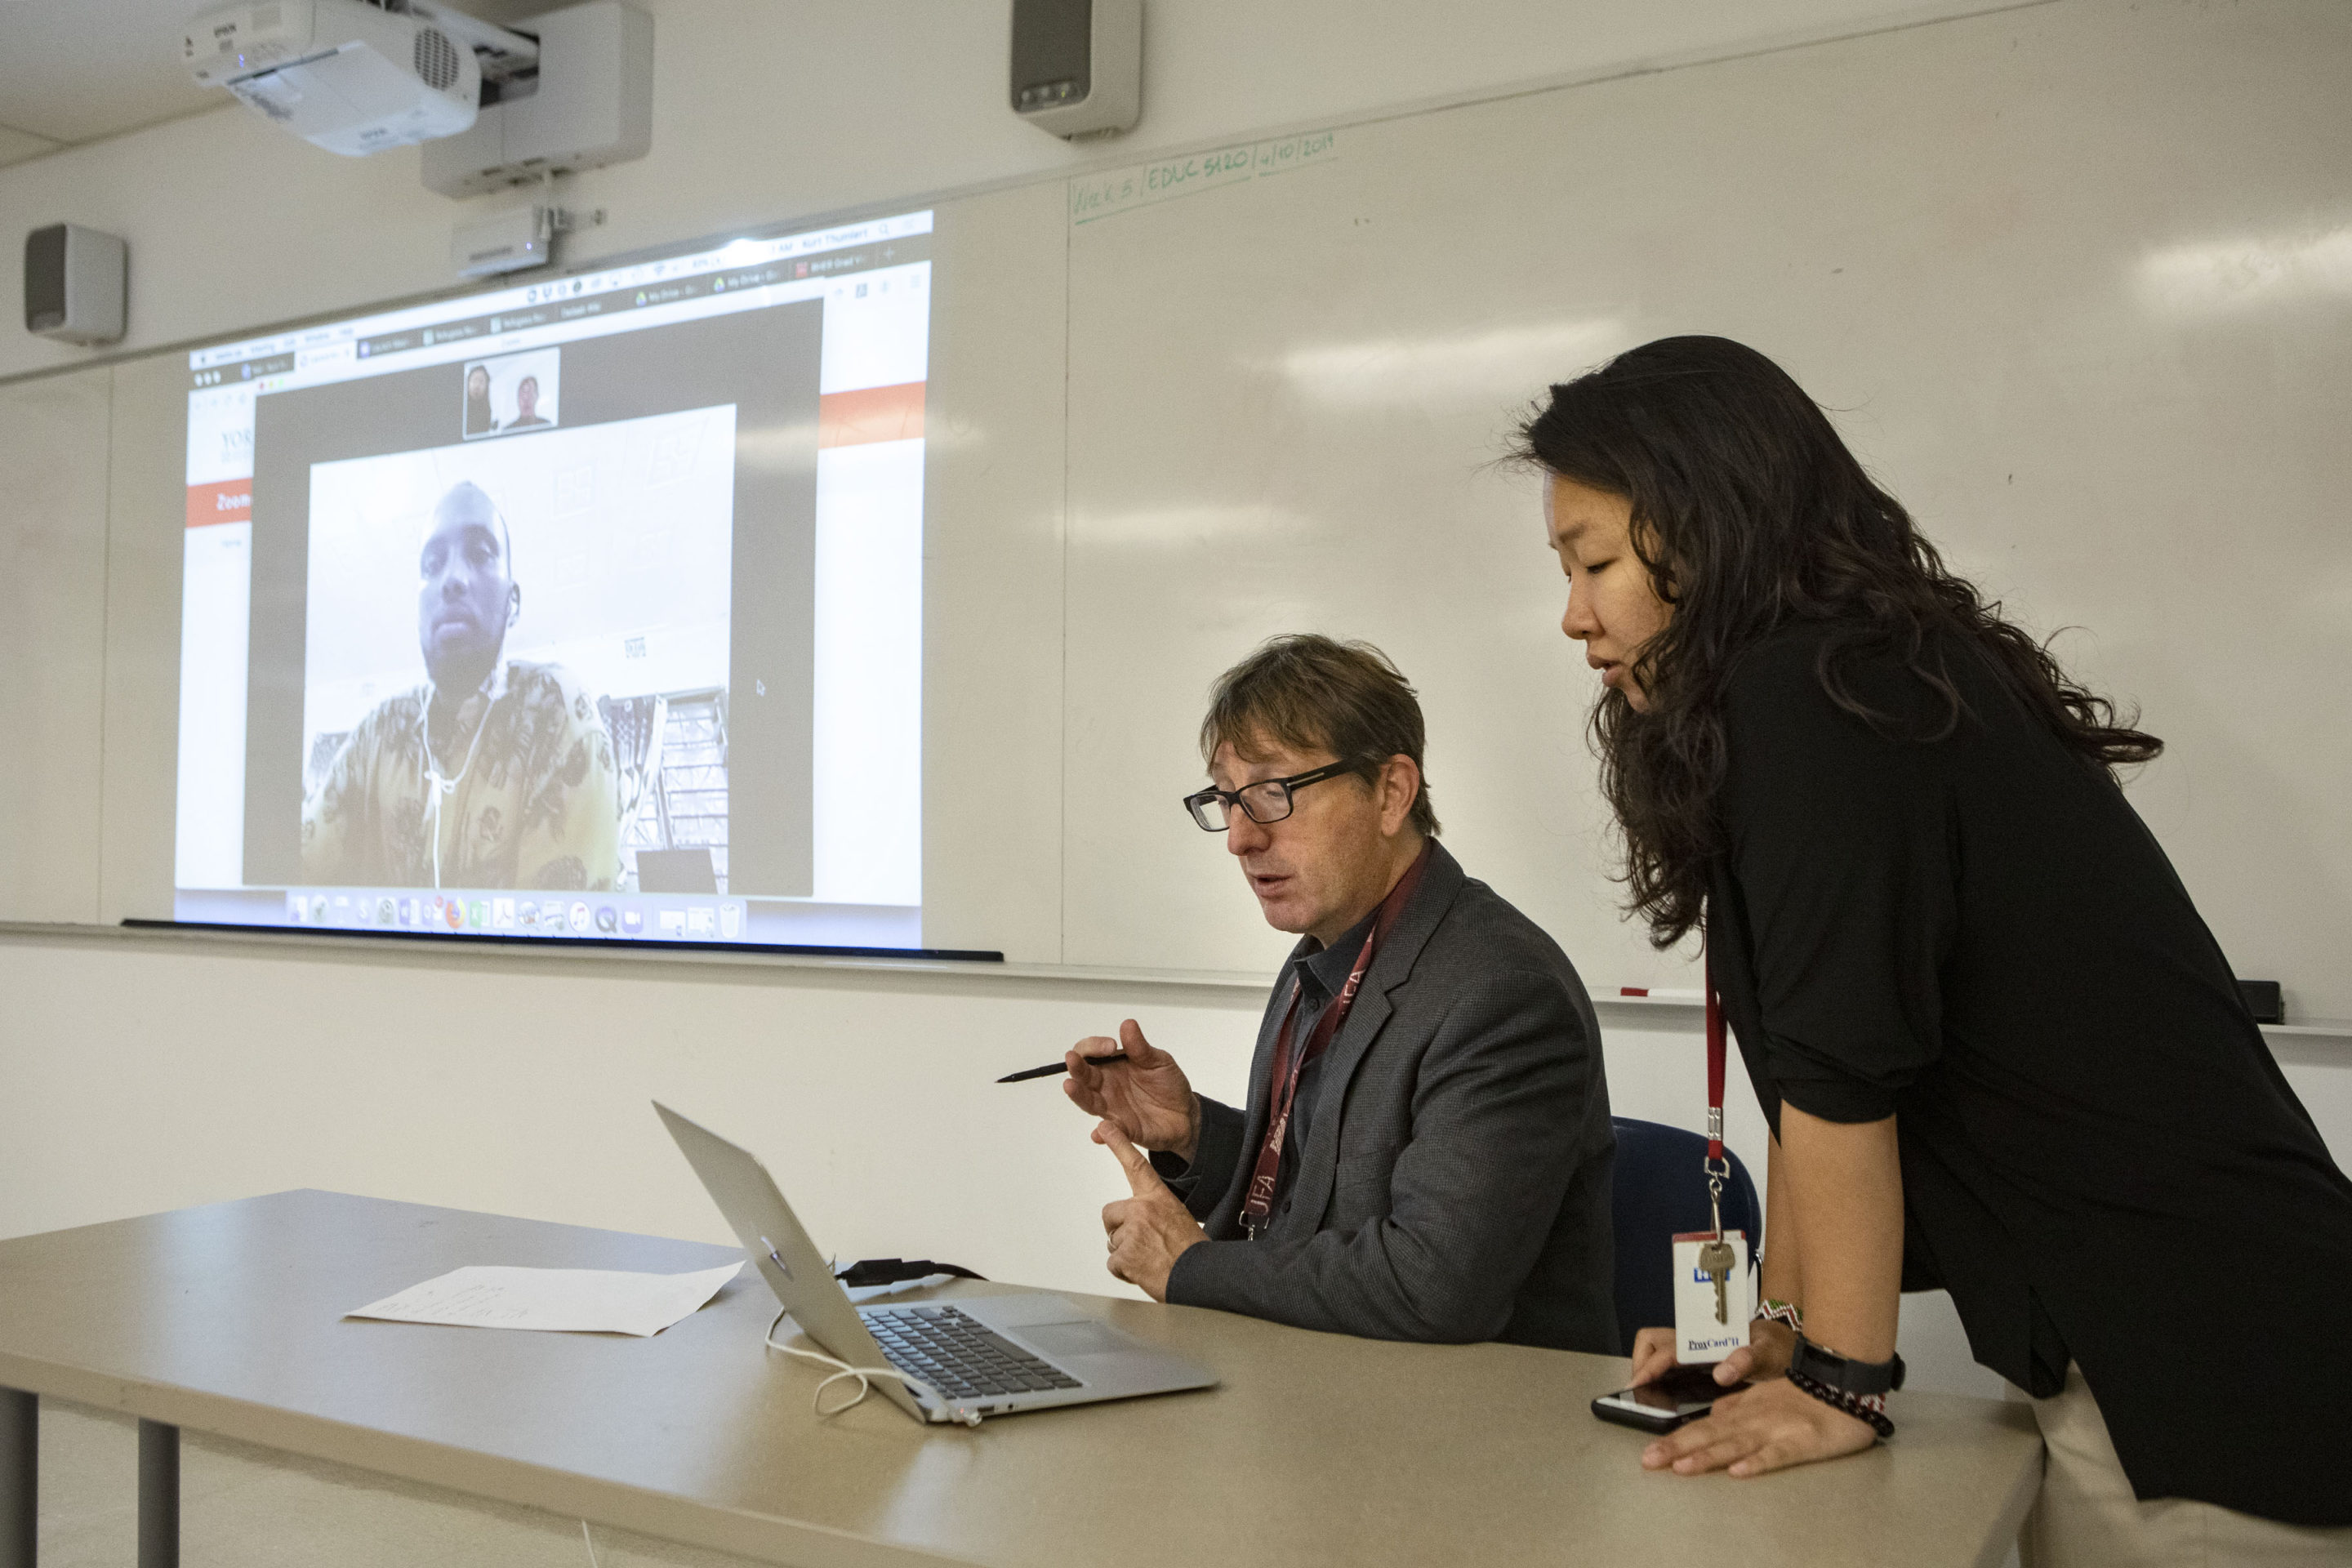 A man and a woman look at a lap top while a man is projected on a screen on the wall